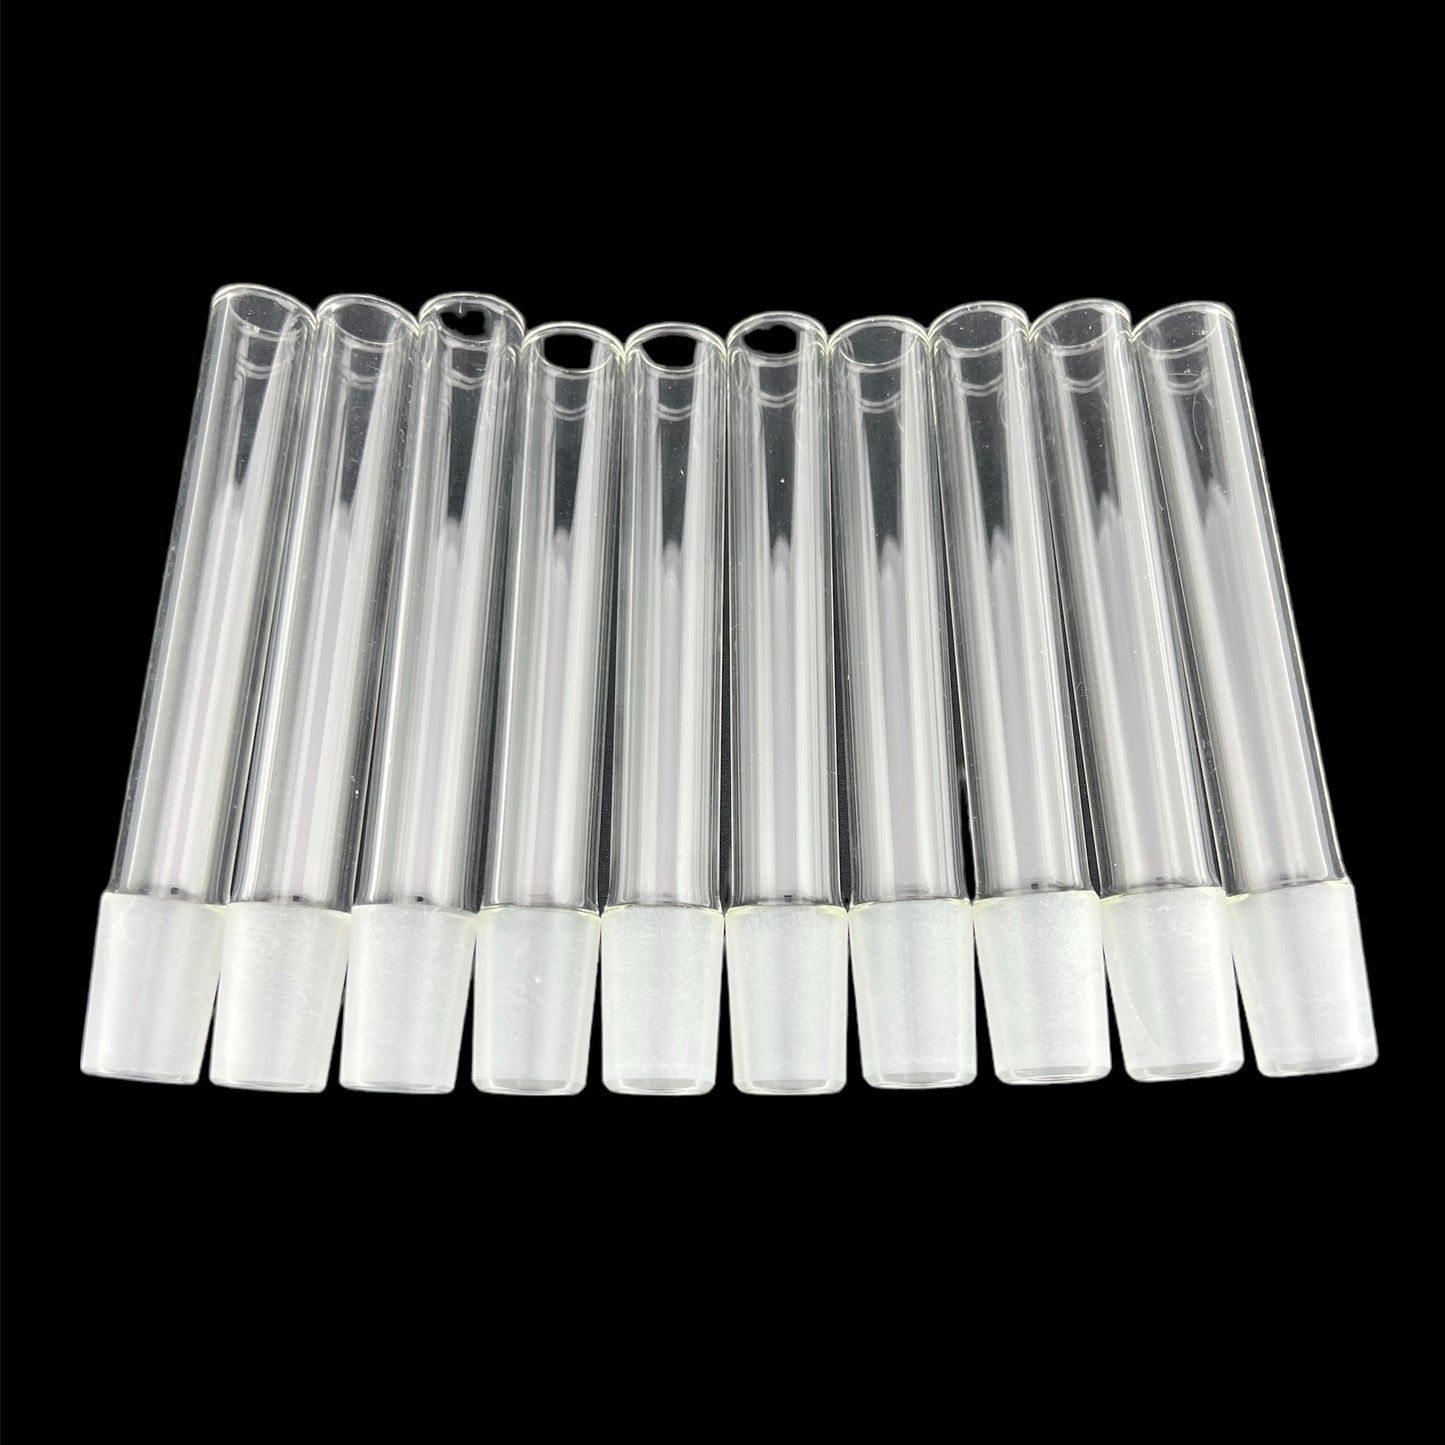 19mm Male Ground Joints - 19/26 Chinese - COE 33 - Borosilicate Glass